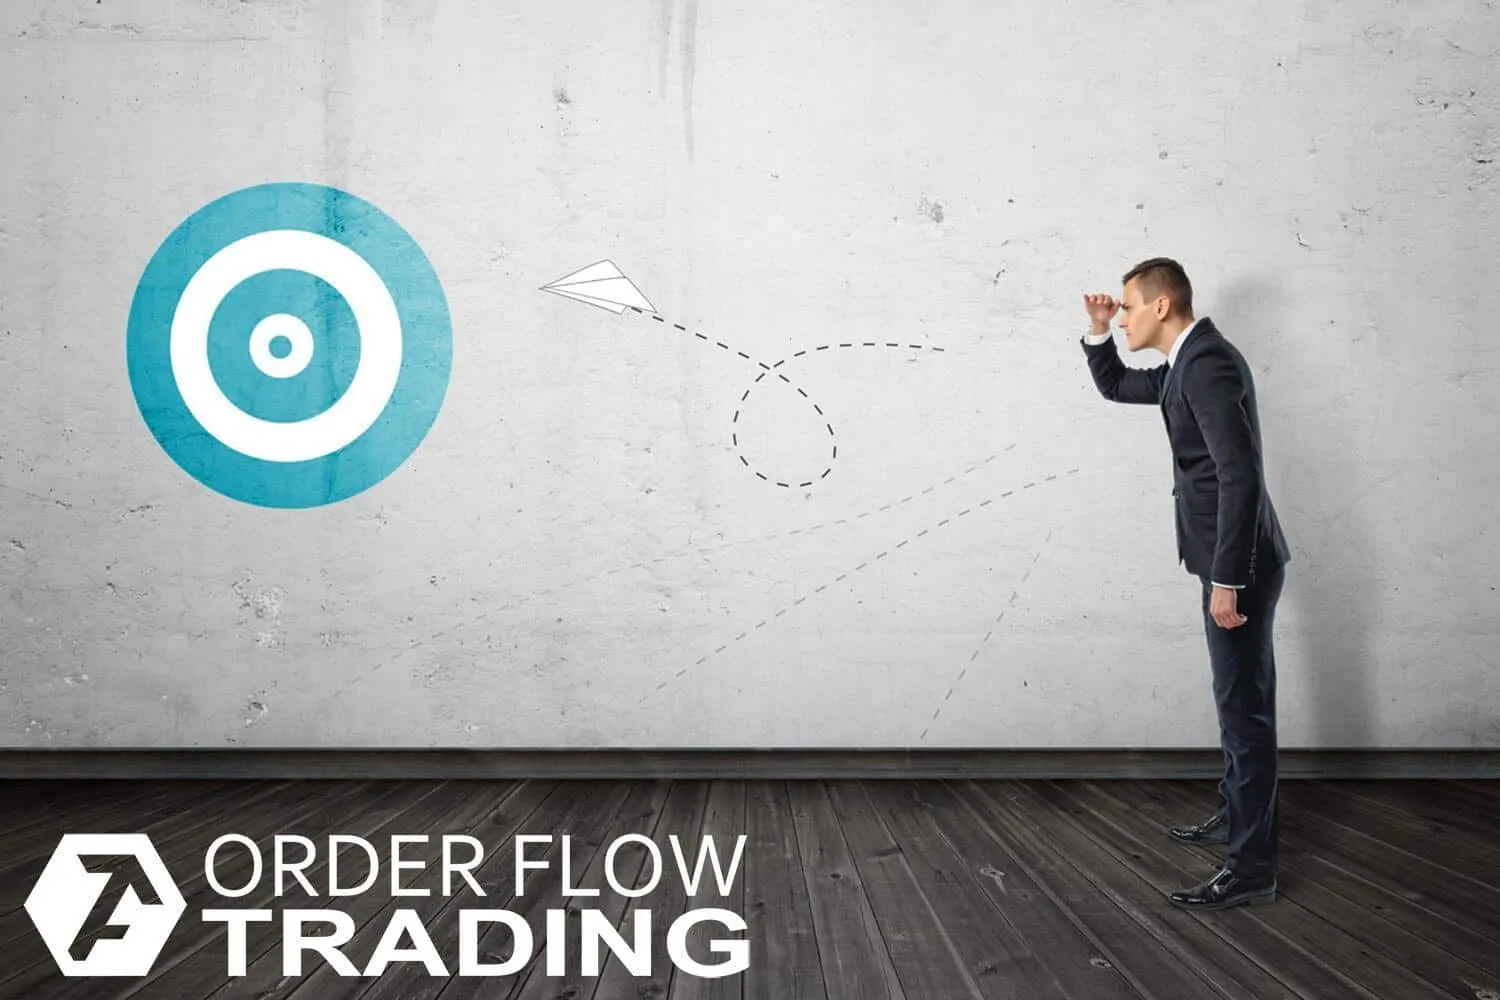 Trading as a business: 9 things you should know